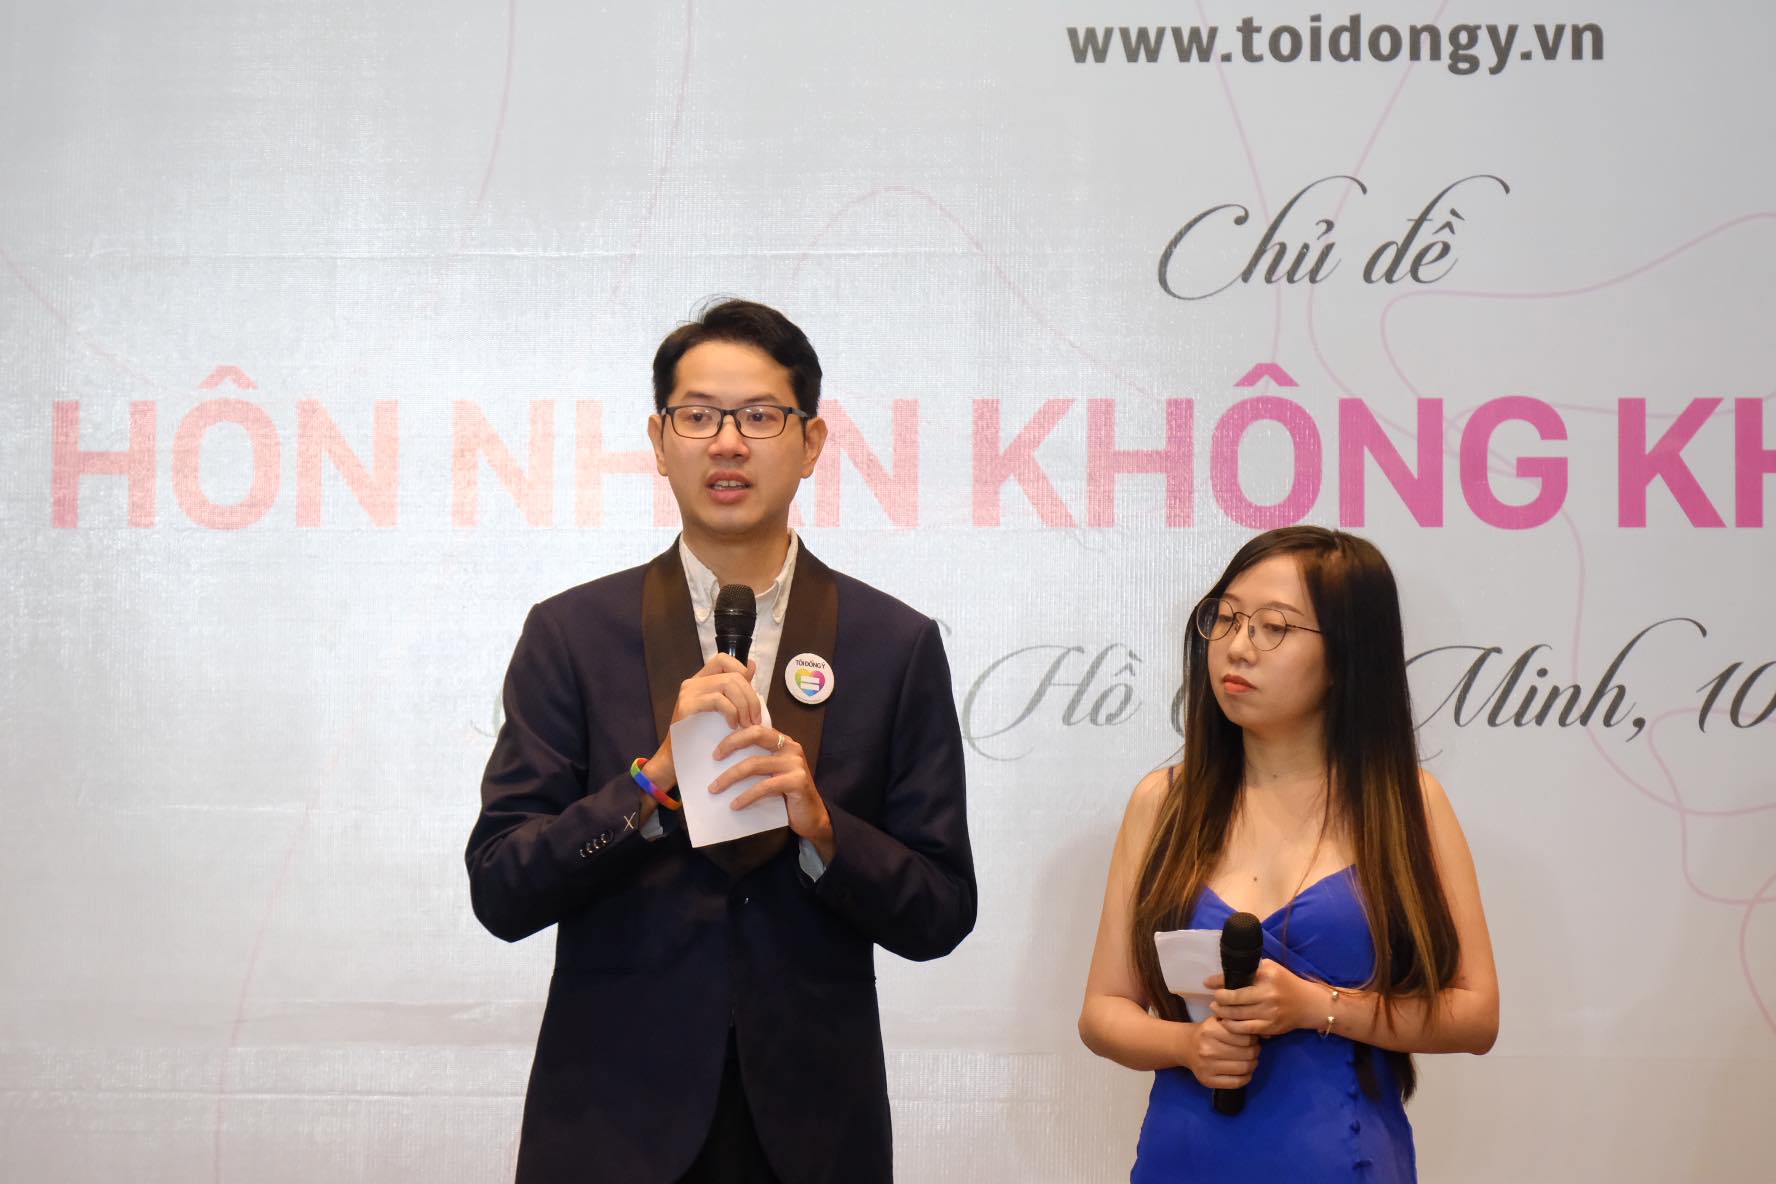 Luong The Huy (left), director of iSEE Institute, and Ngo Le Phuong Linh (right), director of ICS Center, deliver a speech at the opening event of Toi Dong Y 2022 in Ho Chi Minh City on August 10, 2022. Photo: Vu Thuy / Tuoi Tre News